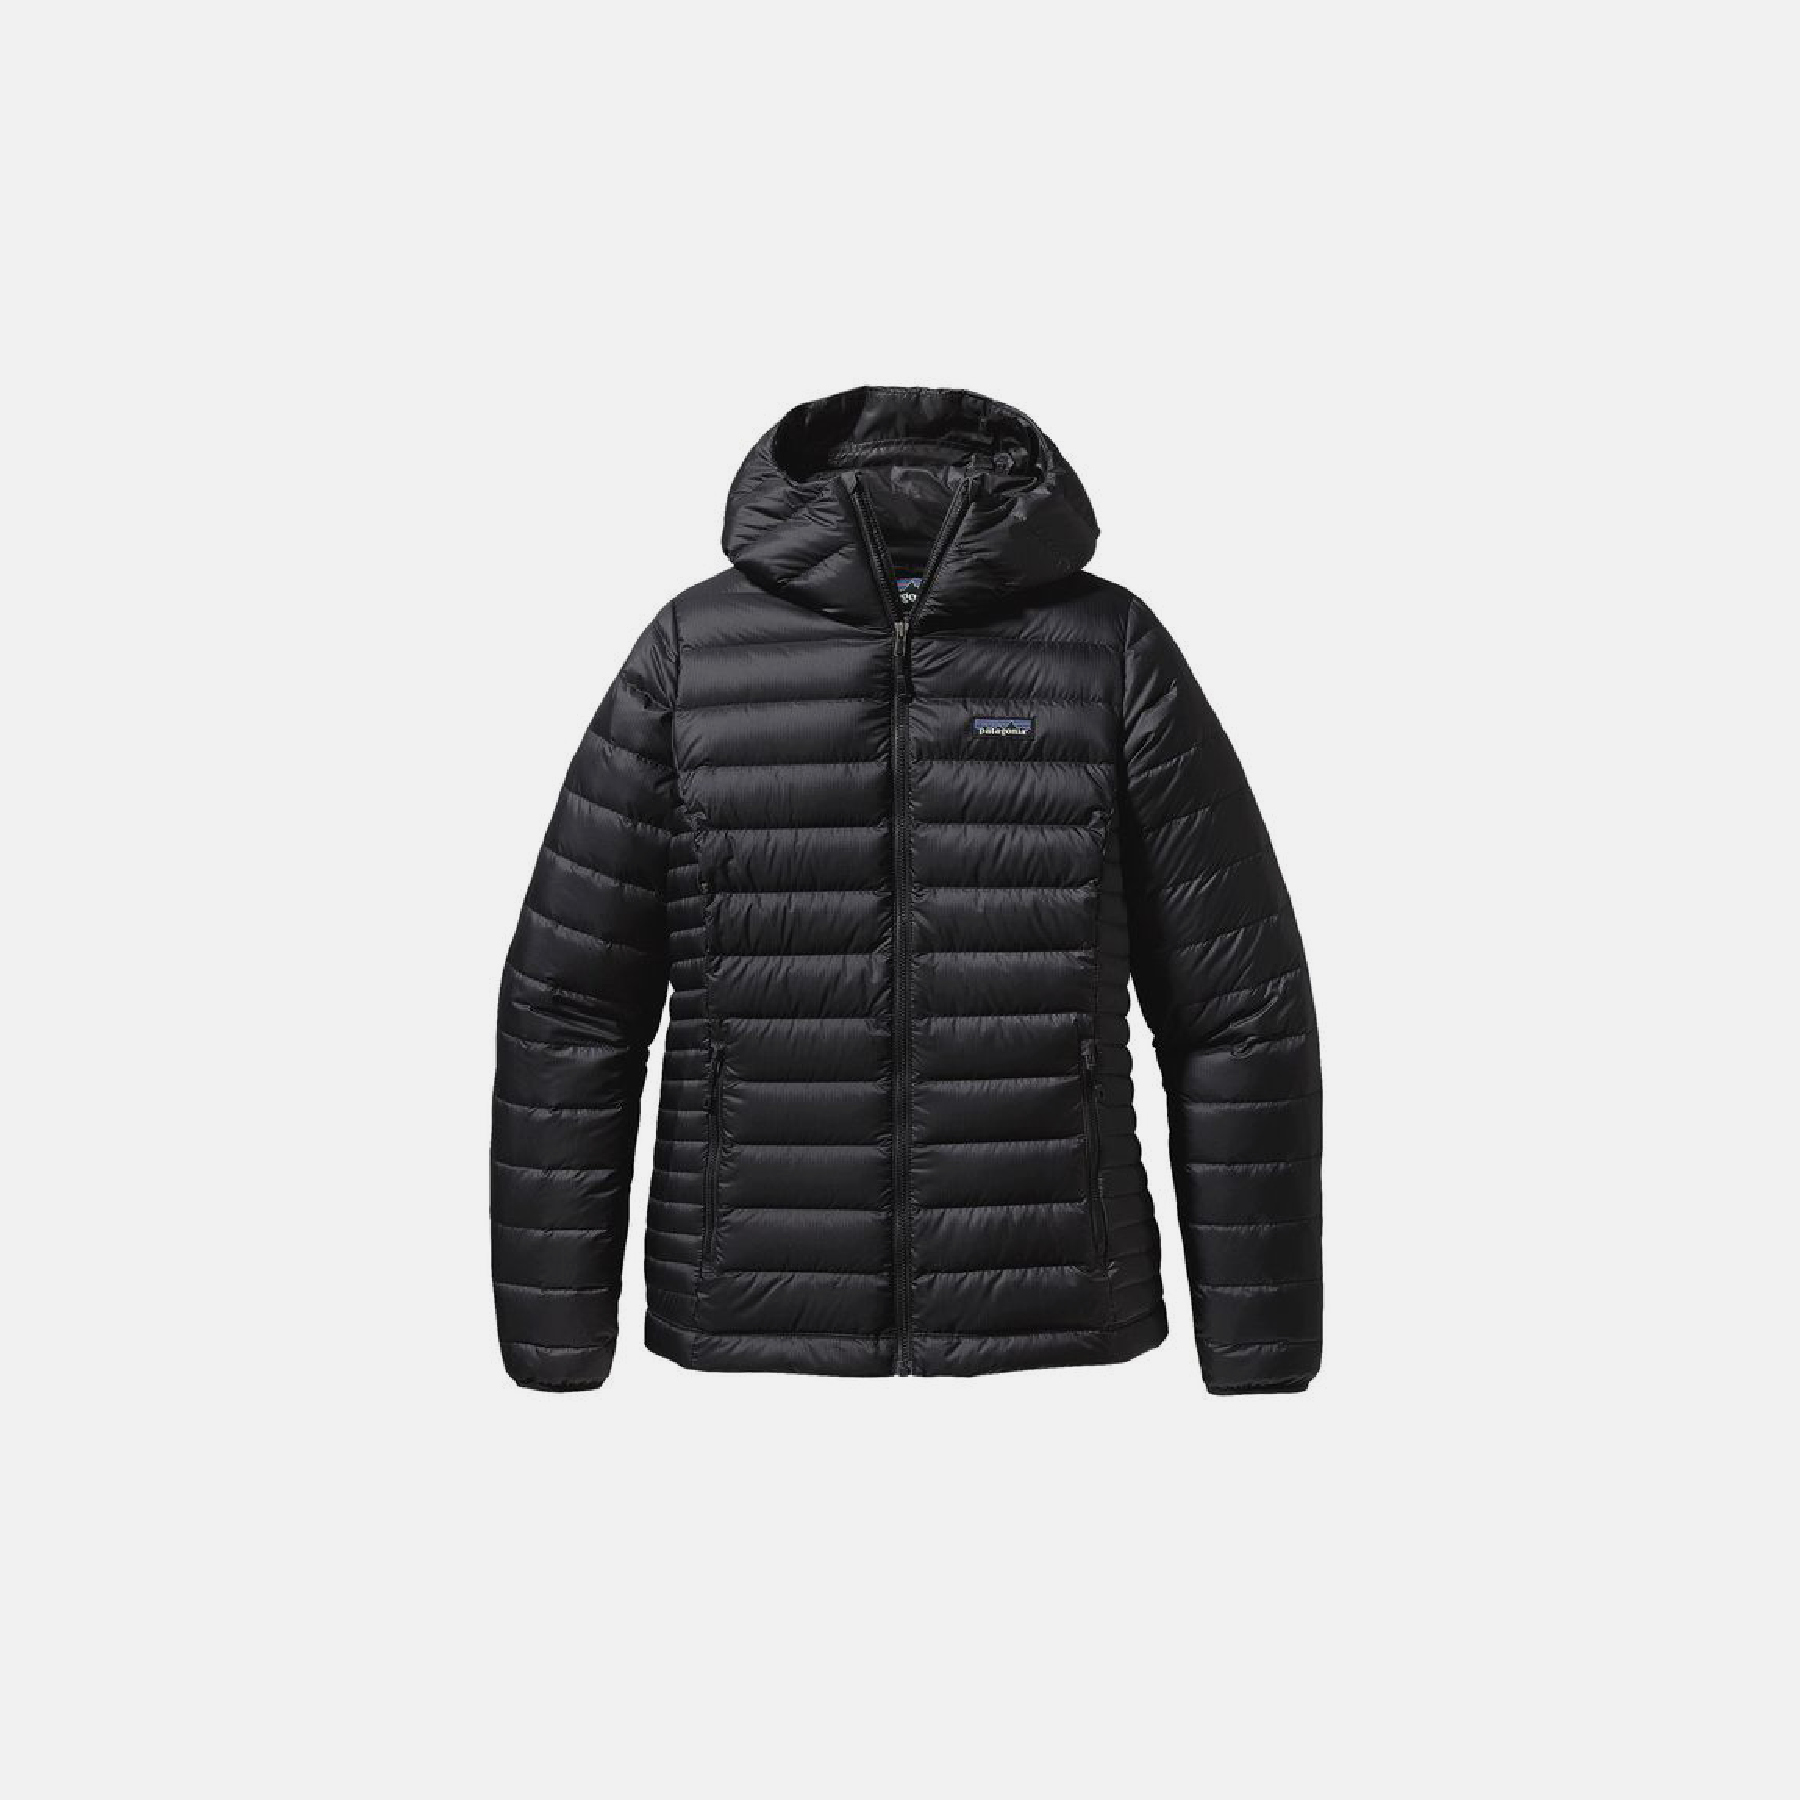 ALL-SORTS-OF-patagonia